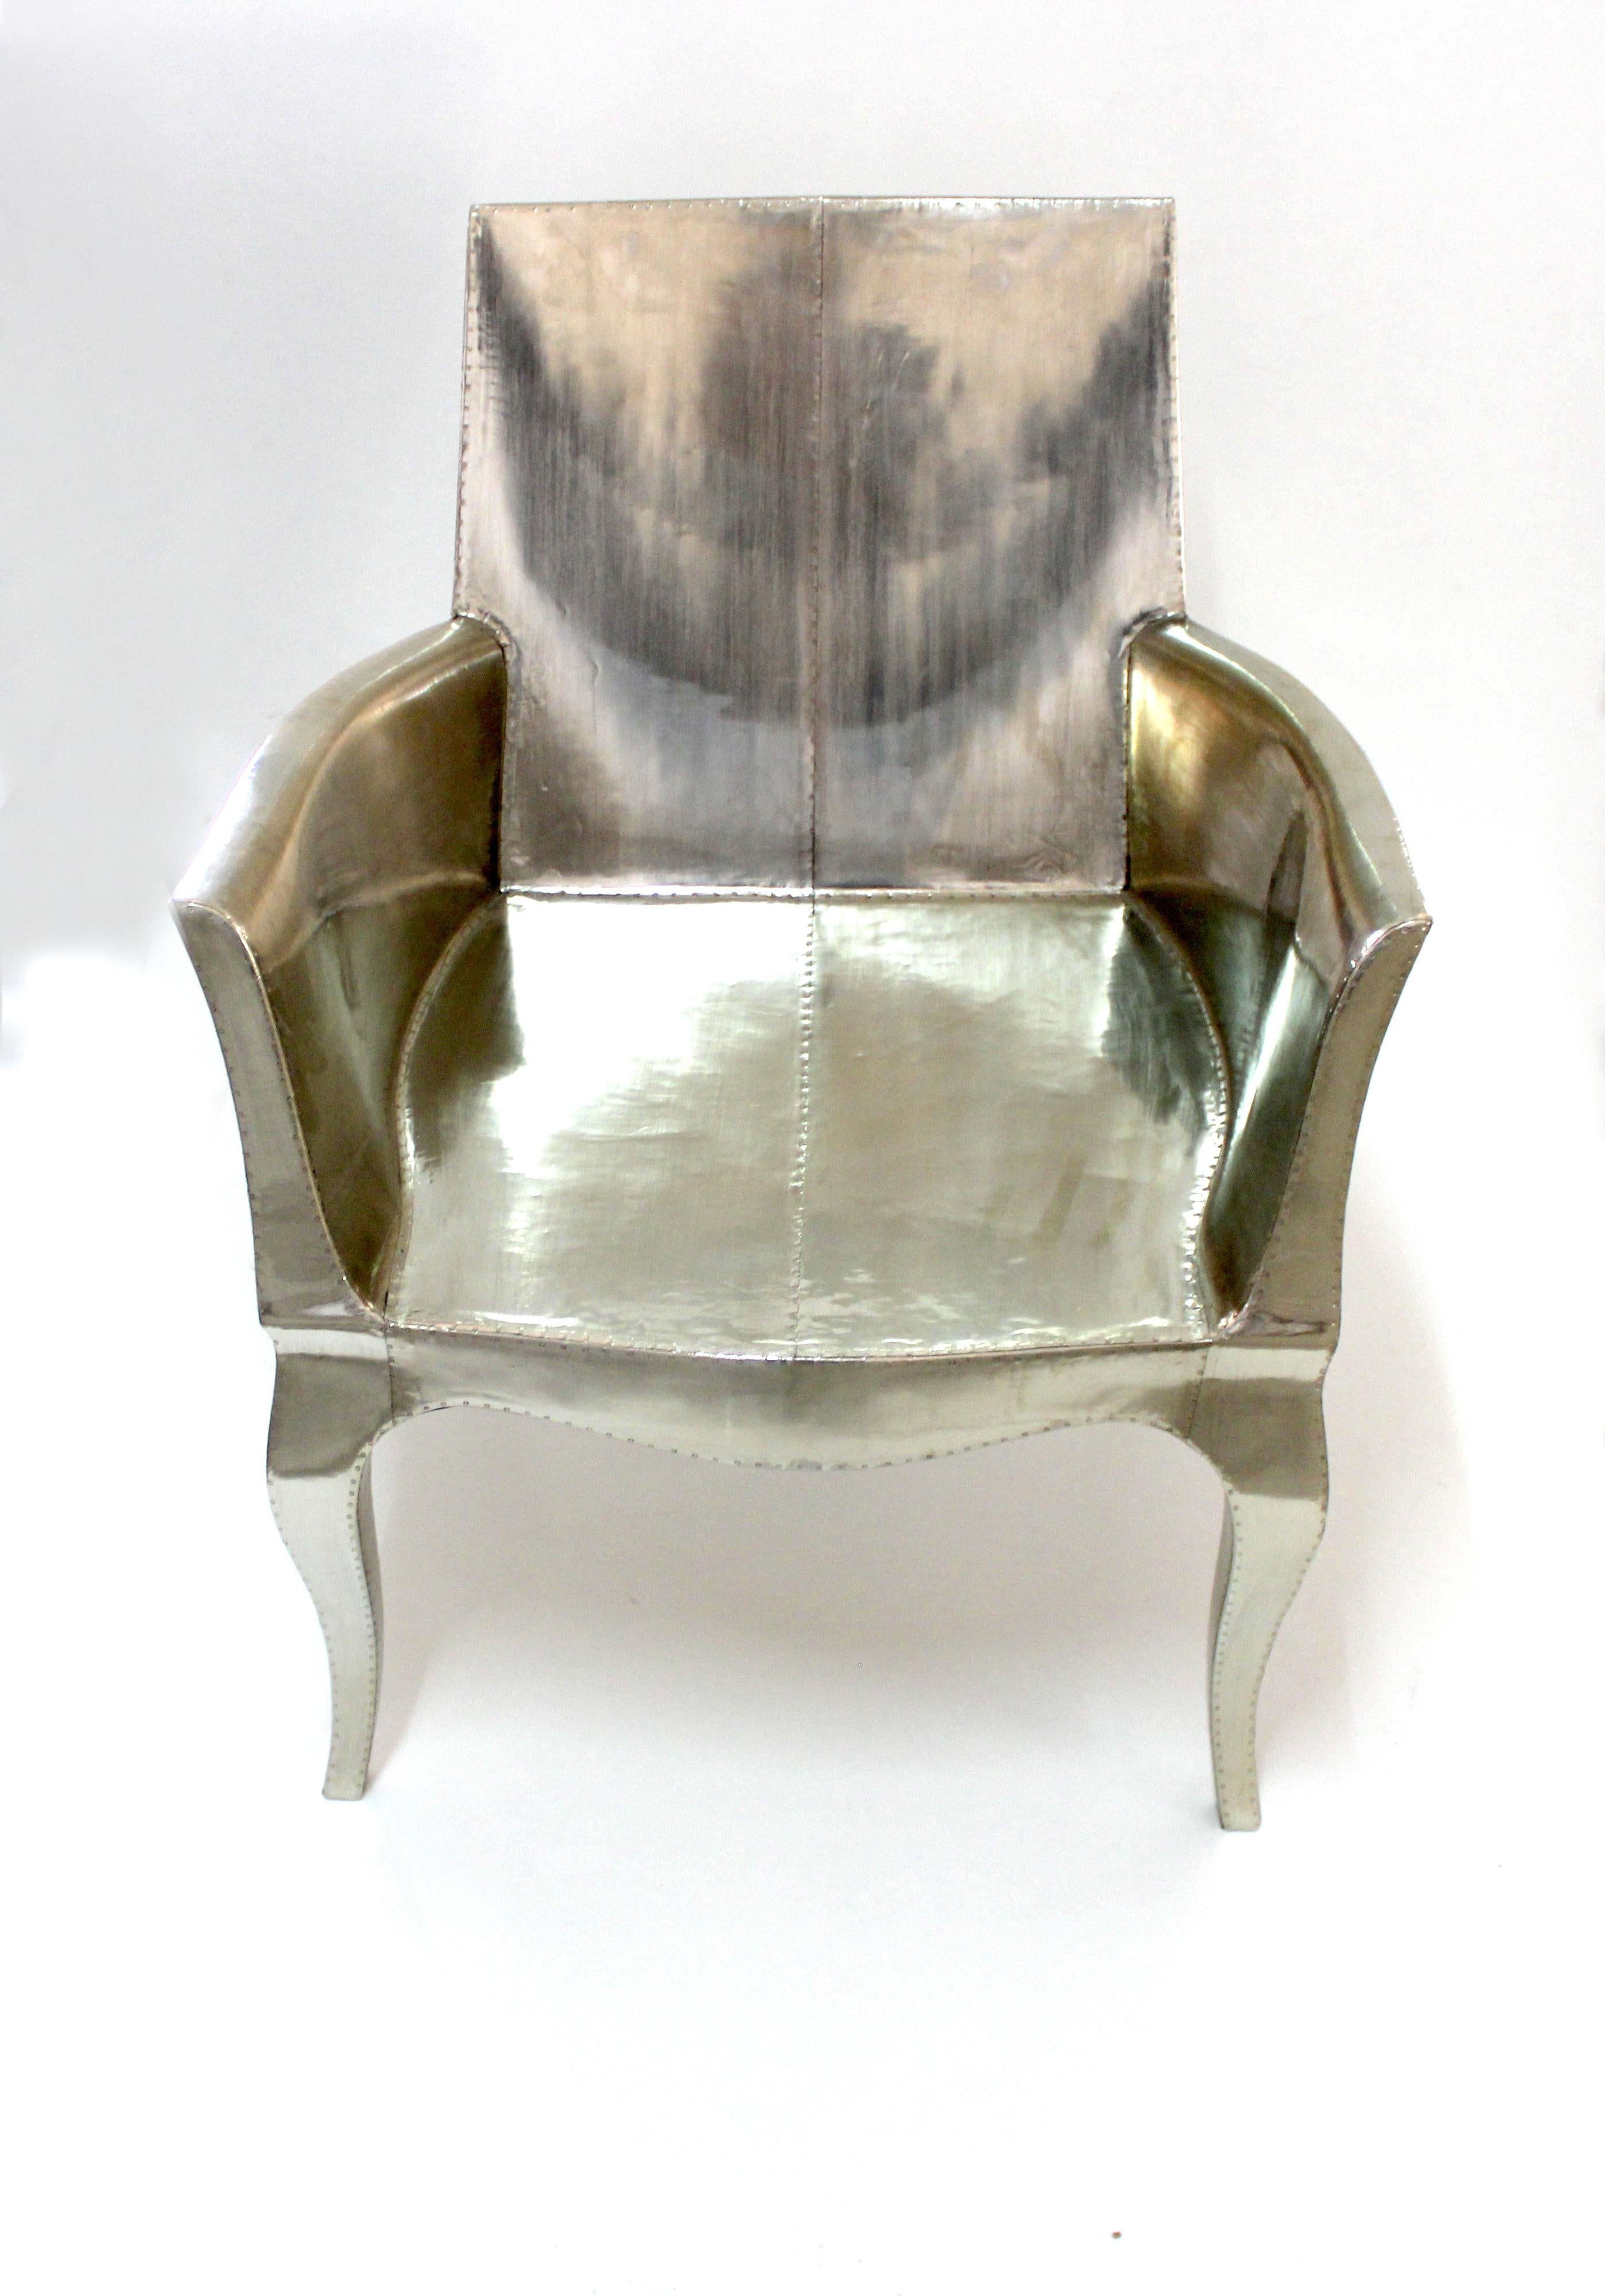 Art Deco Style Chairs Smooth Antique Bronze by Paul Mathieu for S. Odegard For Sale 7